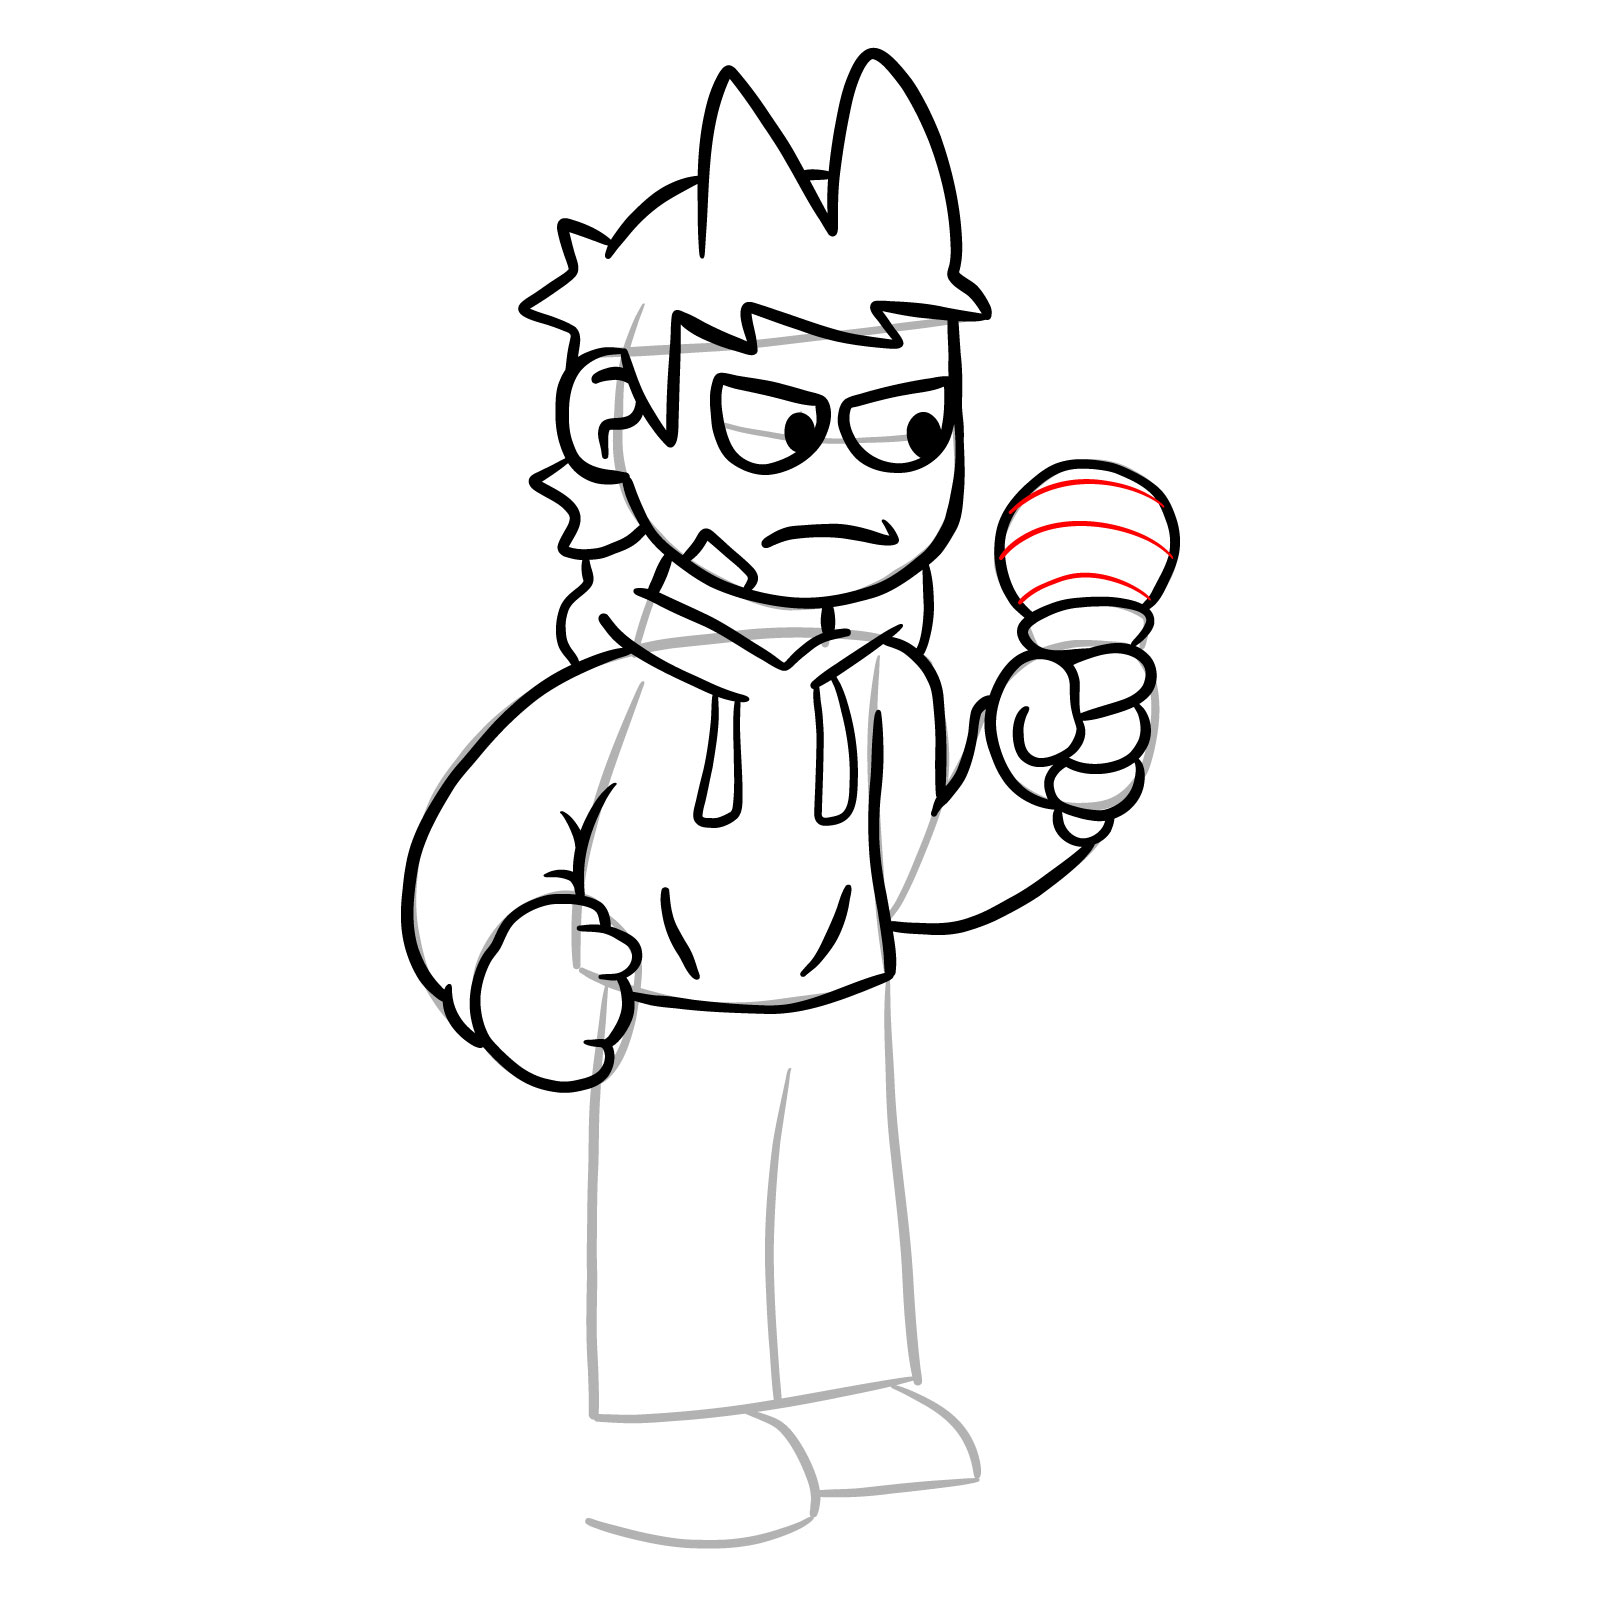 How to draw Tord from FNF - step 20